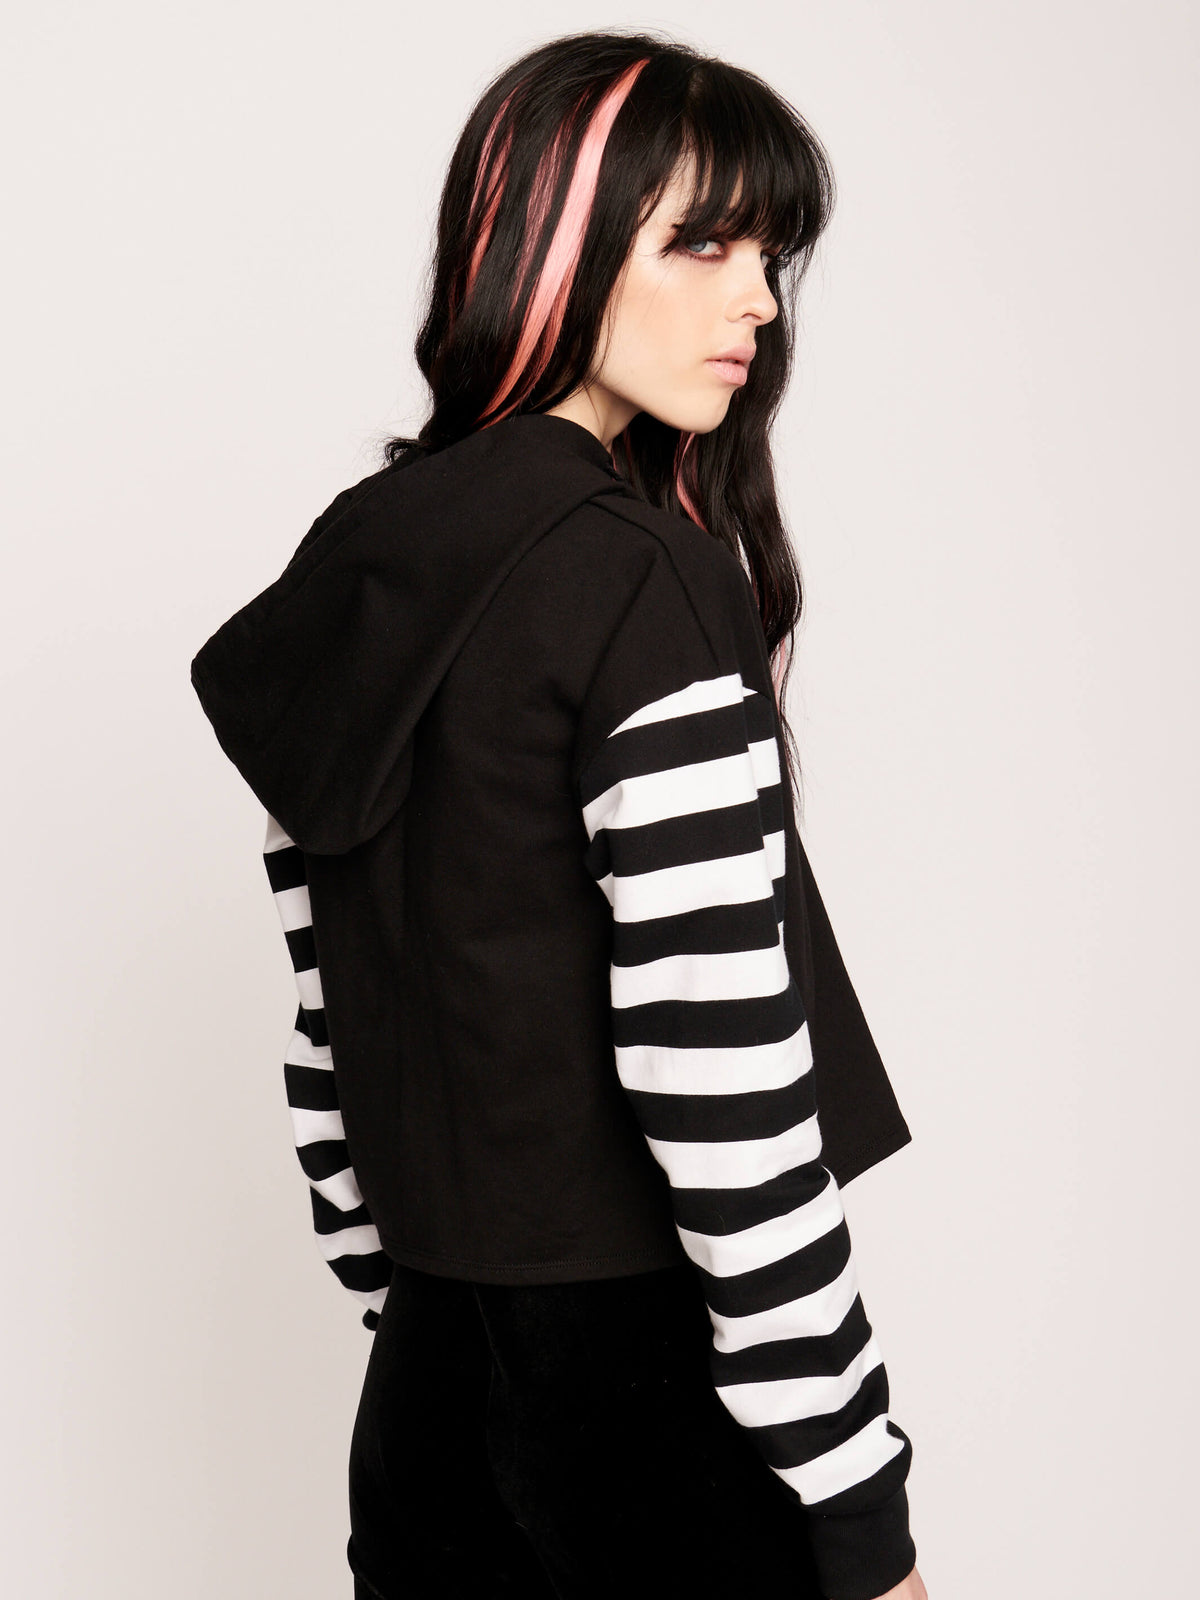 Cropped Midnight Hour logo hoodie with jail stripe sleeves.